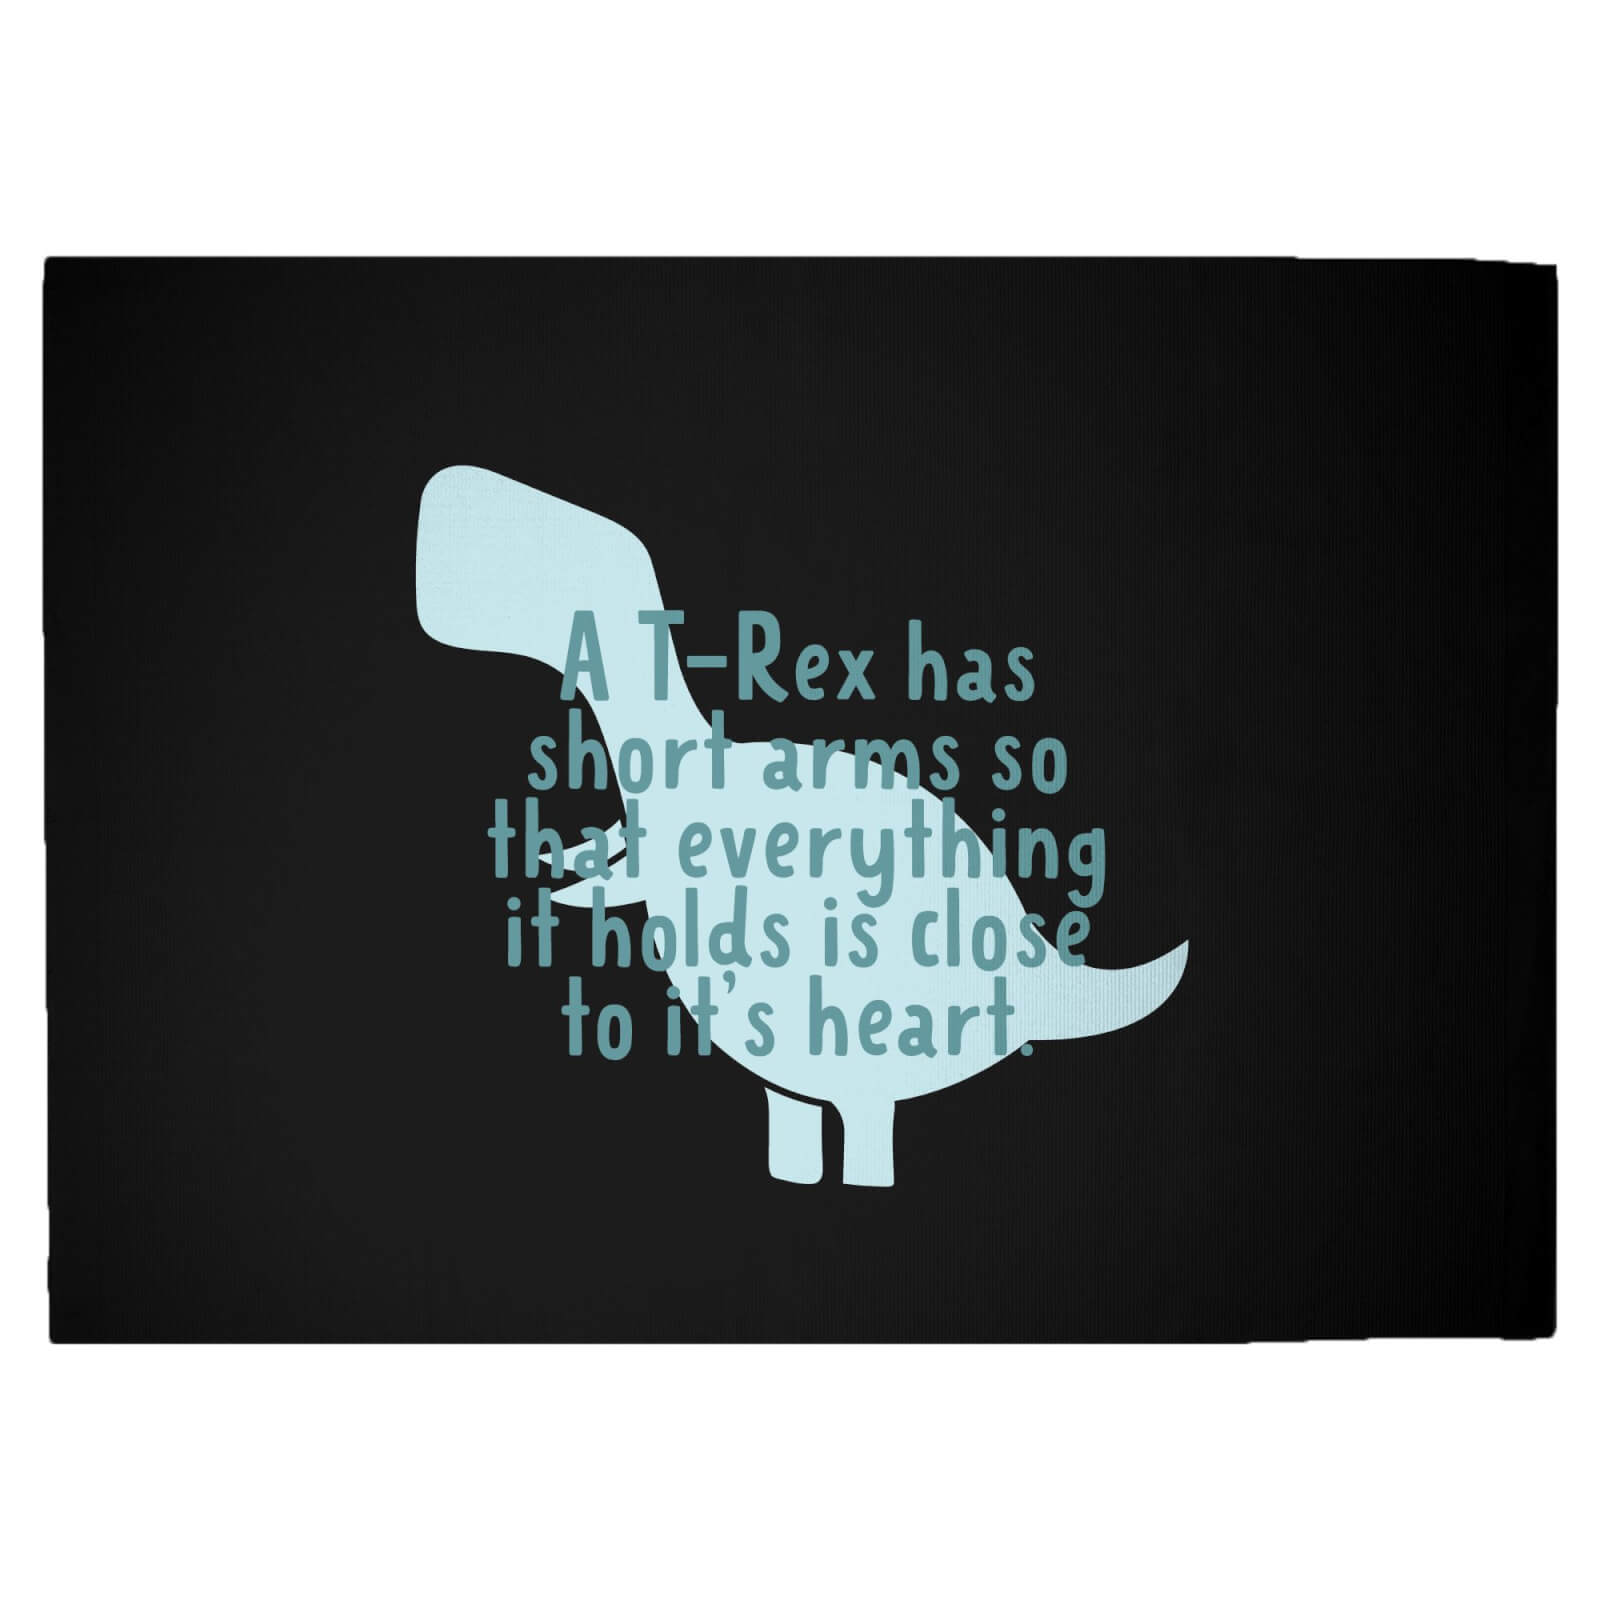 A T-Rex Has Short Arms So That Everything It Holds Is Close To It's Heart Woven Rug - Large